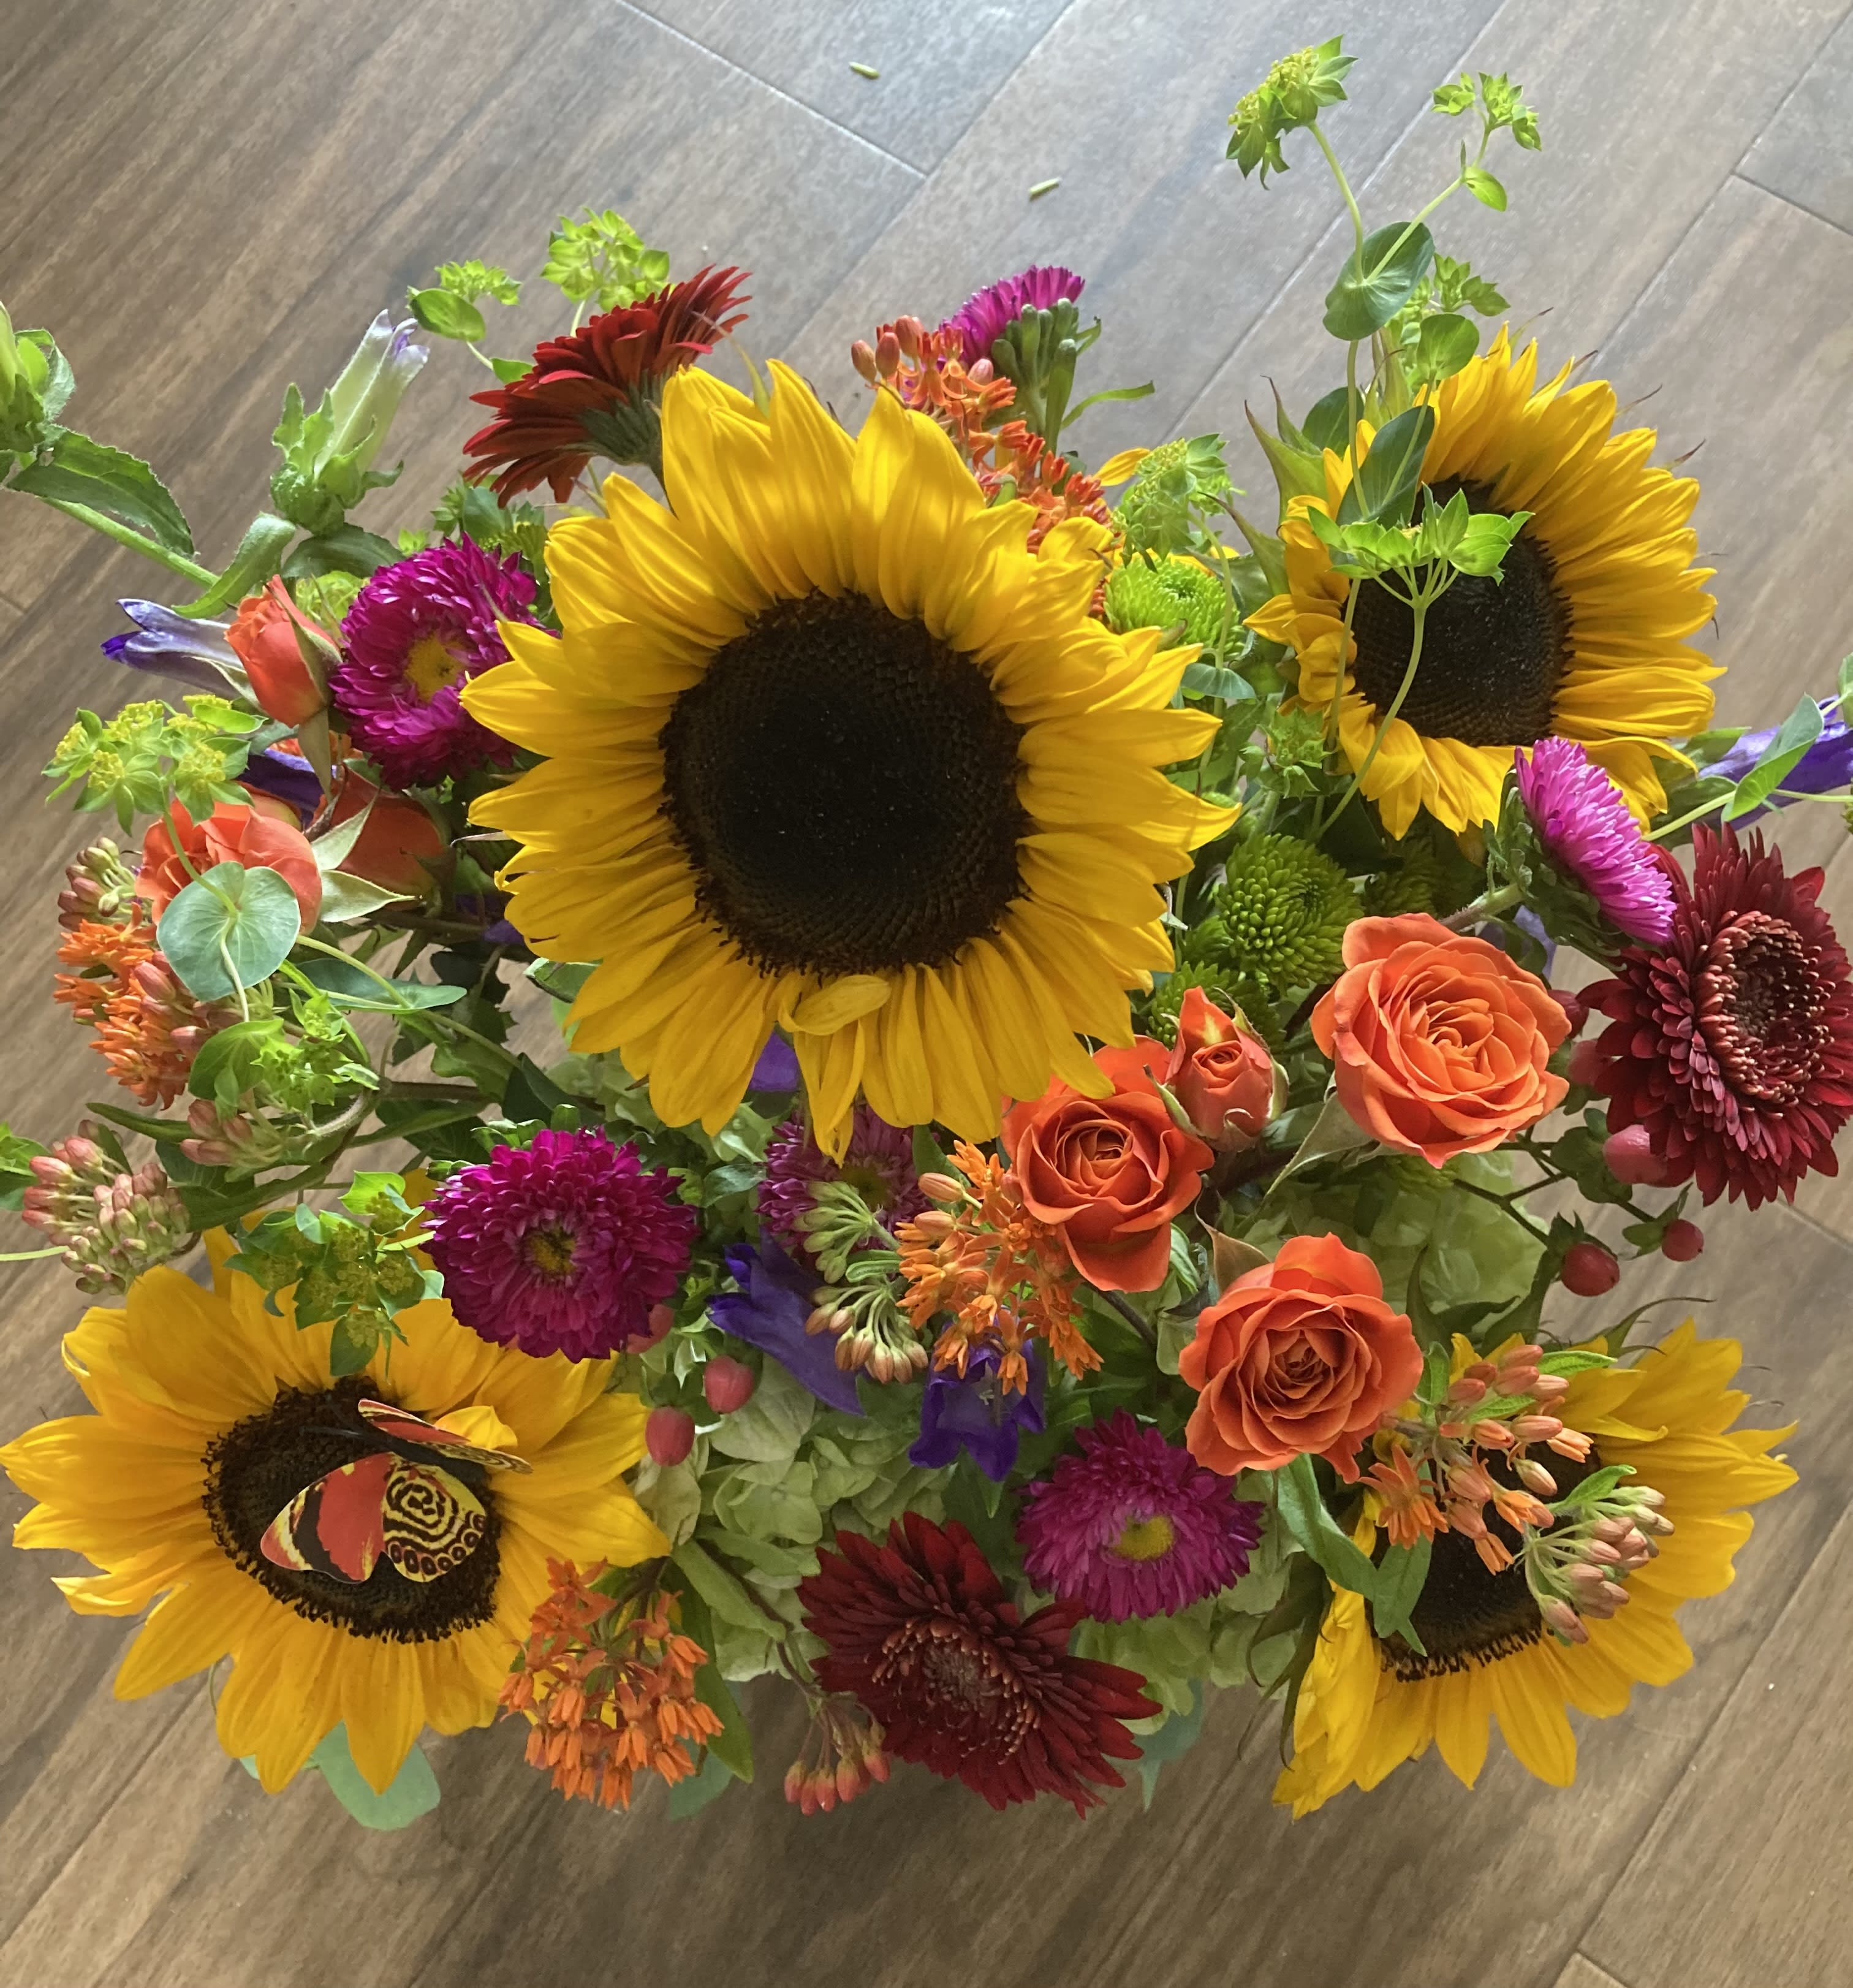 Good Morning Sunshine! - A colorful mixed bouquet with sunflowers (only when available), spray roses, gerberas, spray roses, and asters. A summertime or autumn, cheerful bouquet.